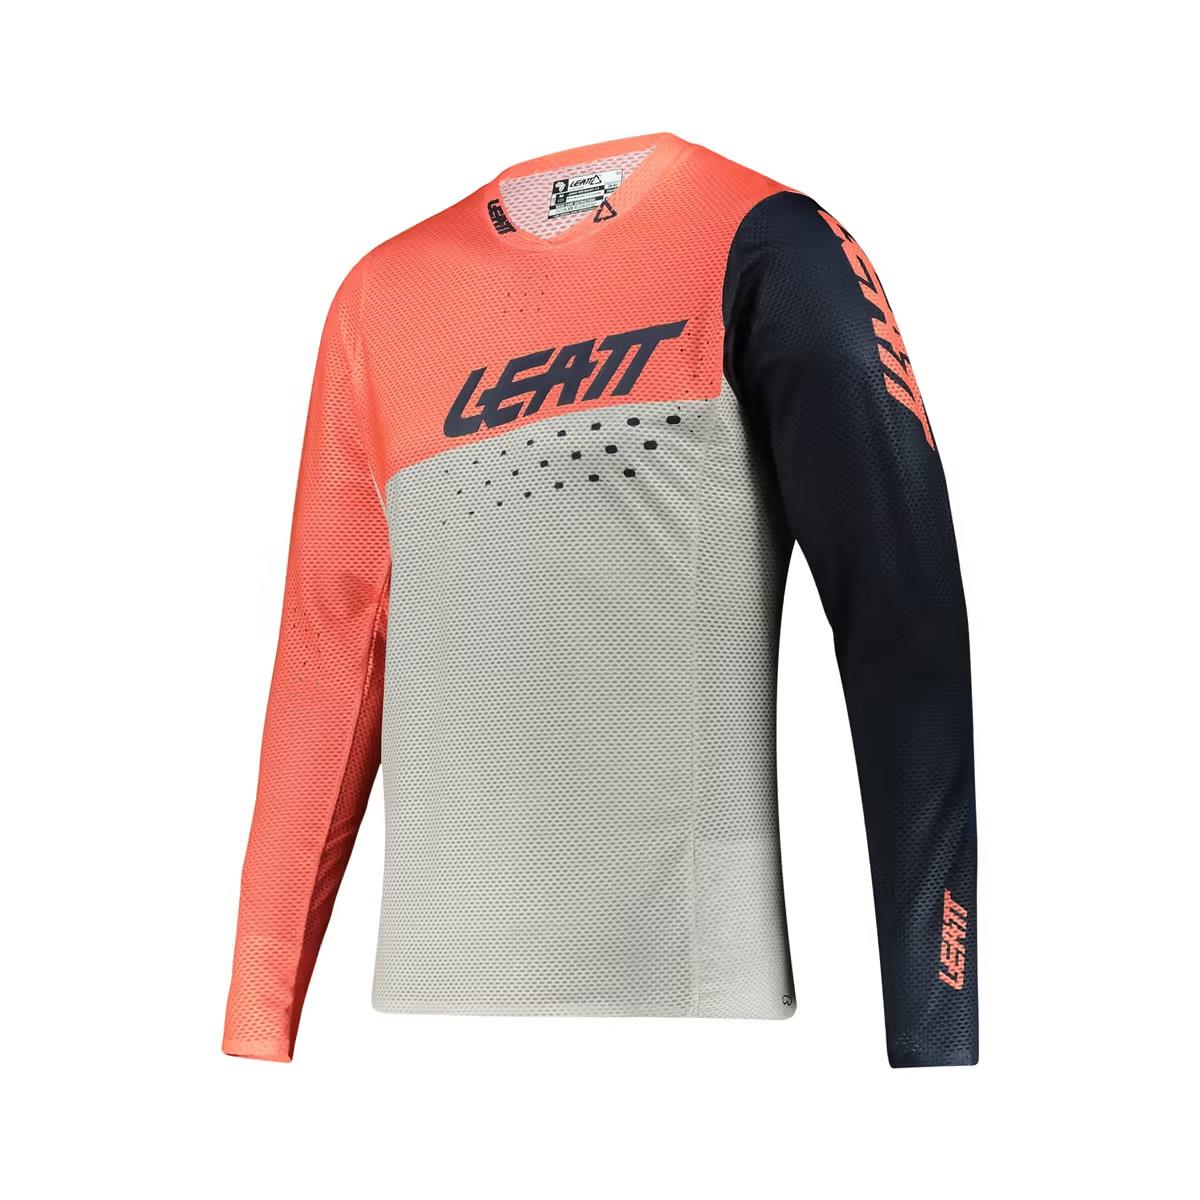 Maillot Manches Longues Mtb Gravity 4.0 Coral taille S